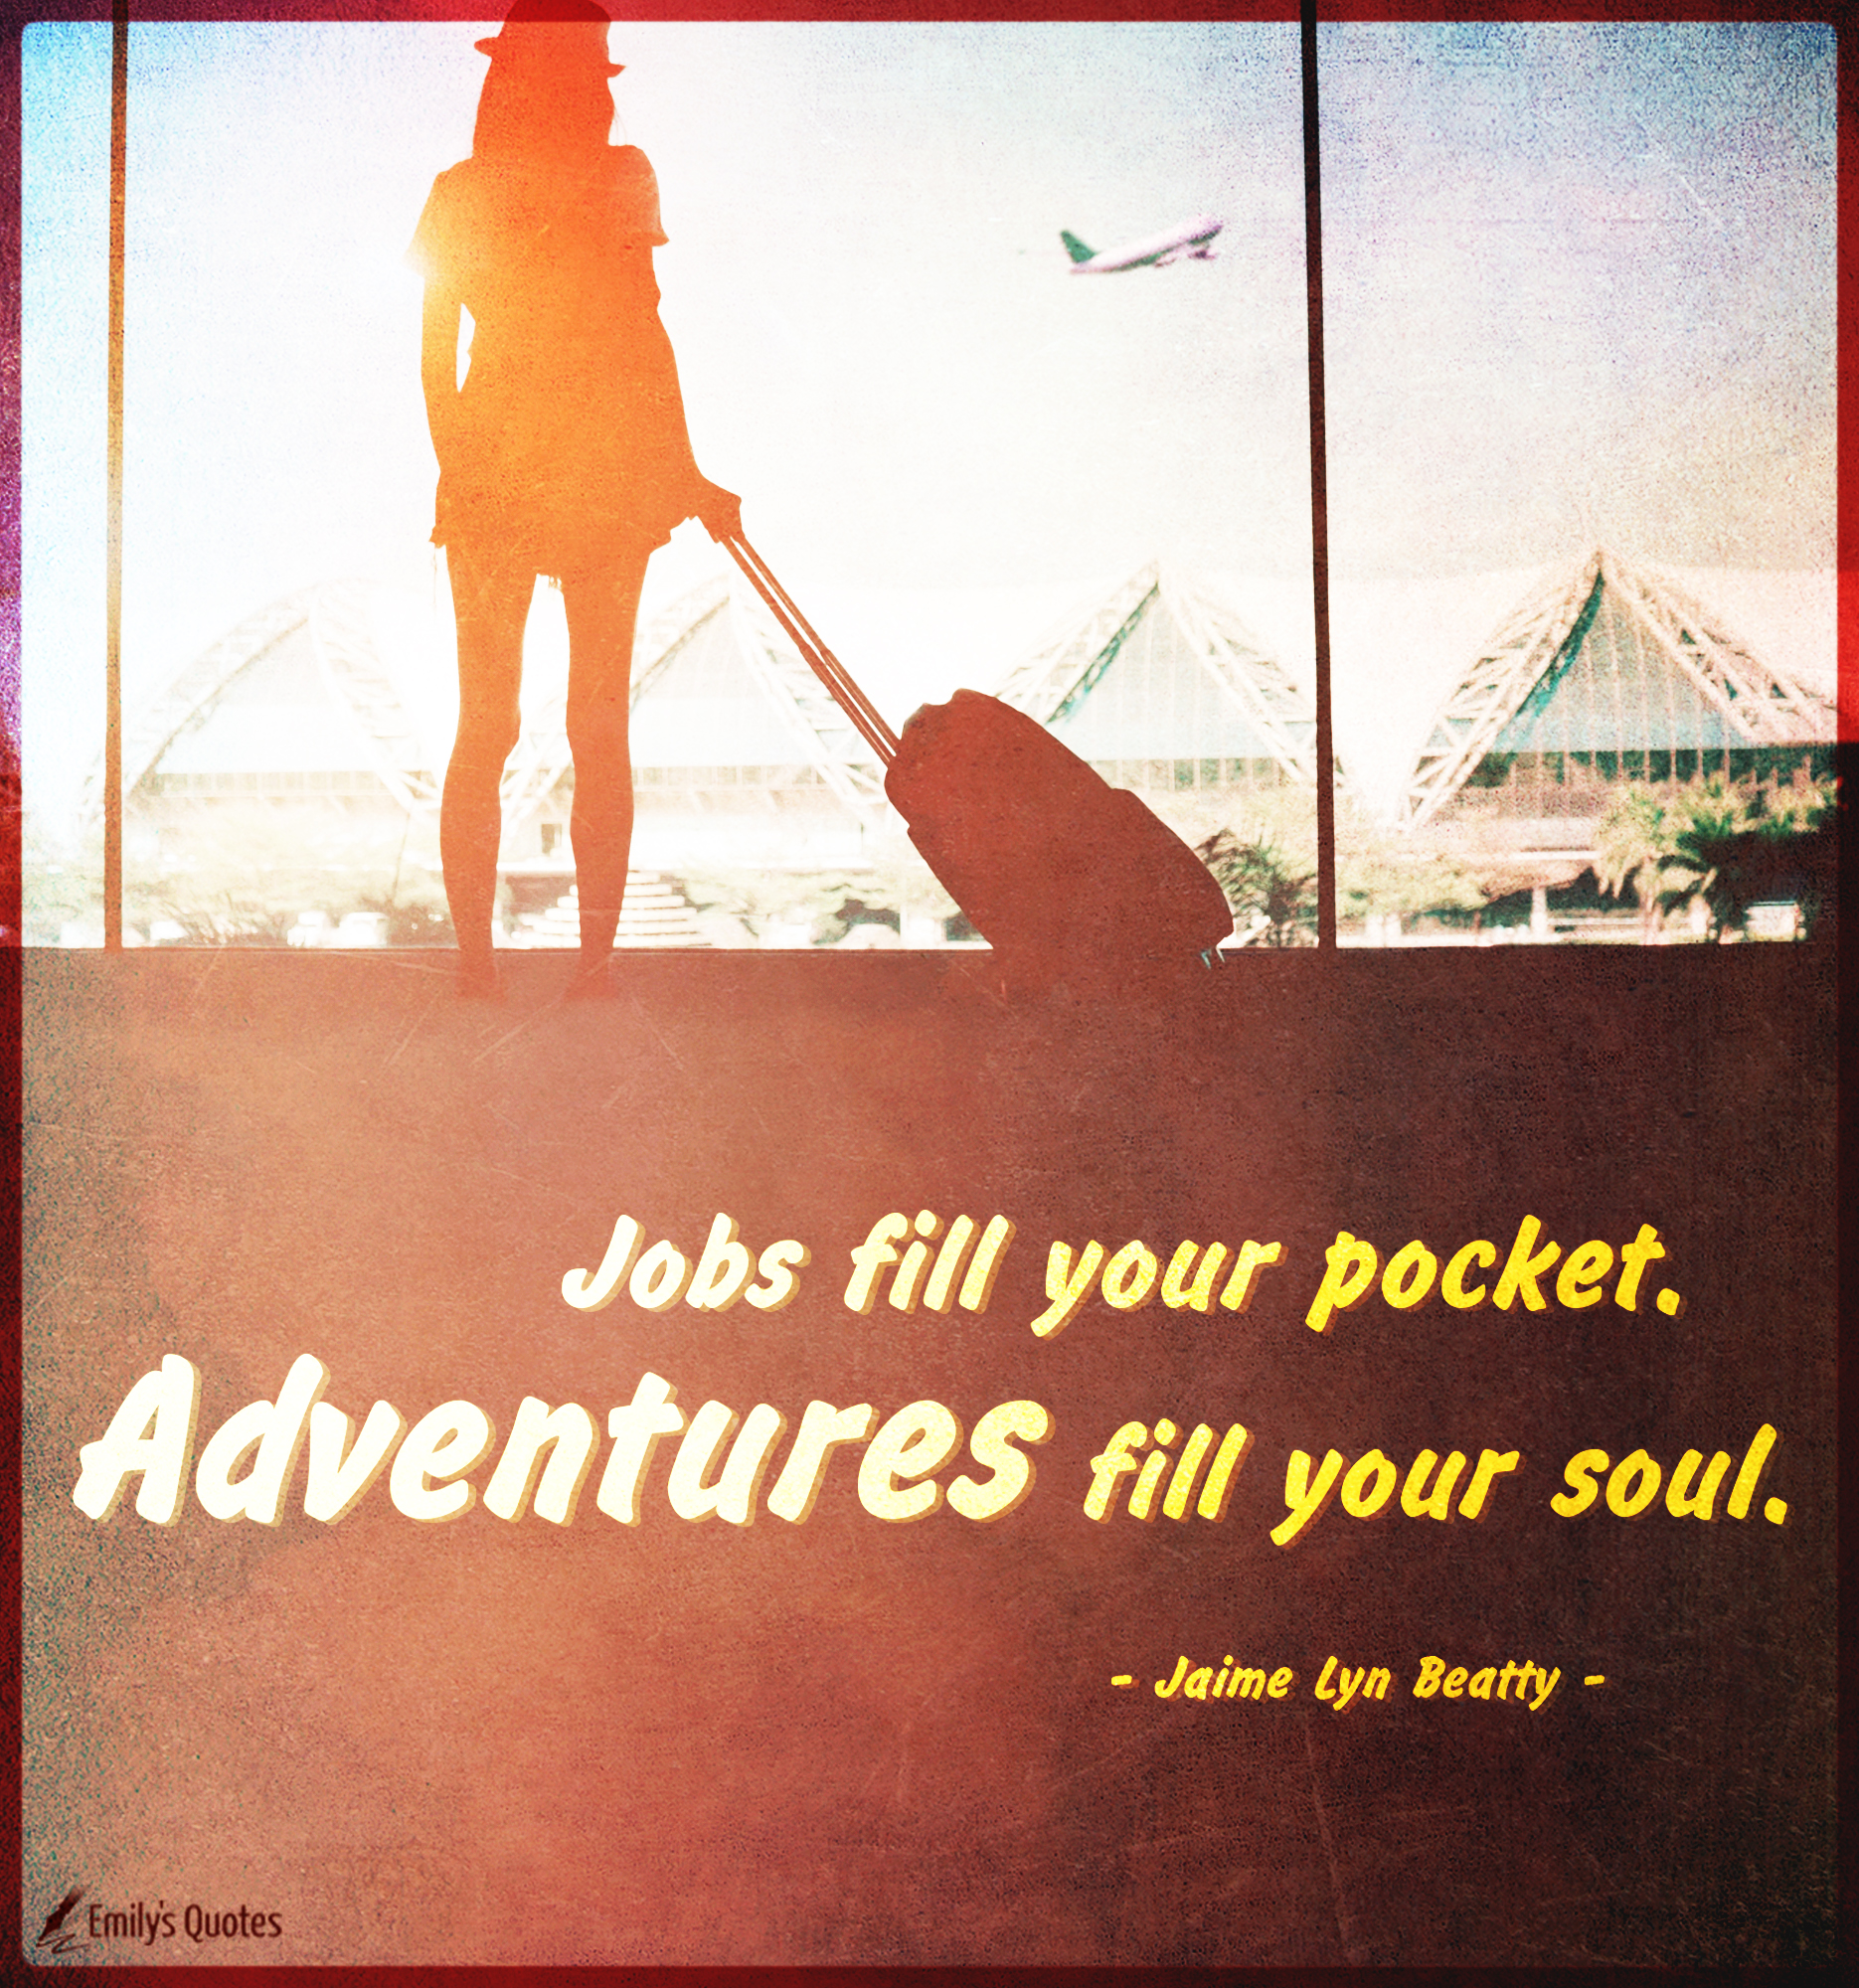 Albums 96+ Images jobs fill your pocket adventures fill your soul Sharp